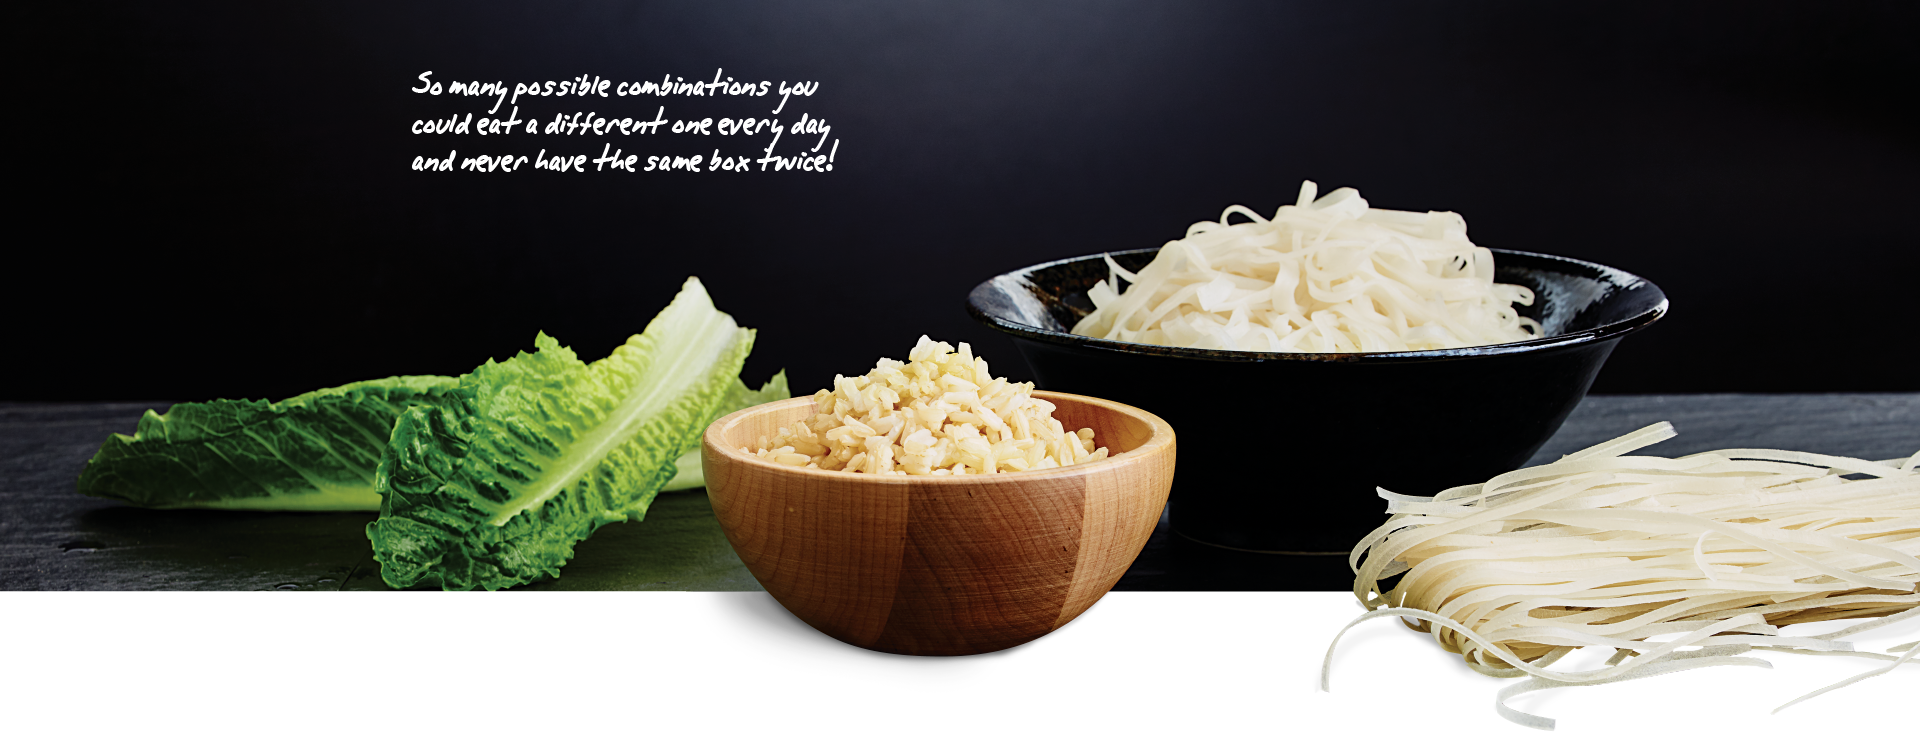 A bowl of rice and a bowl of noodles are on a table.